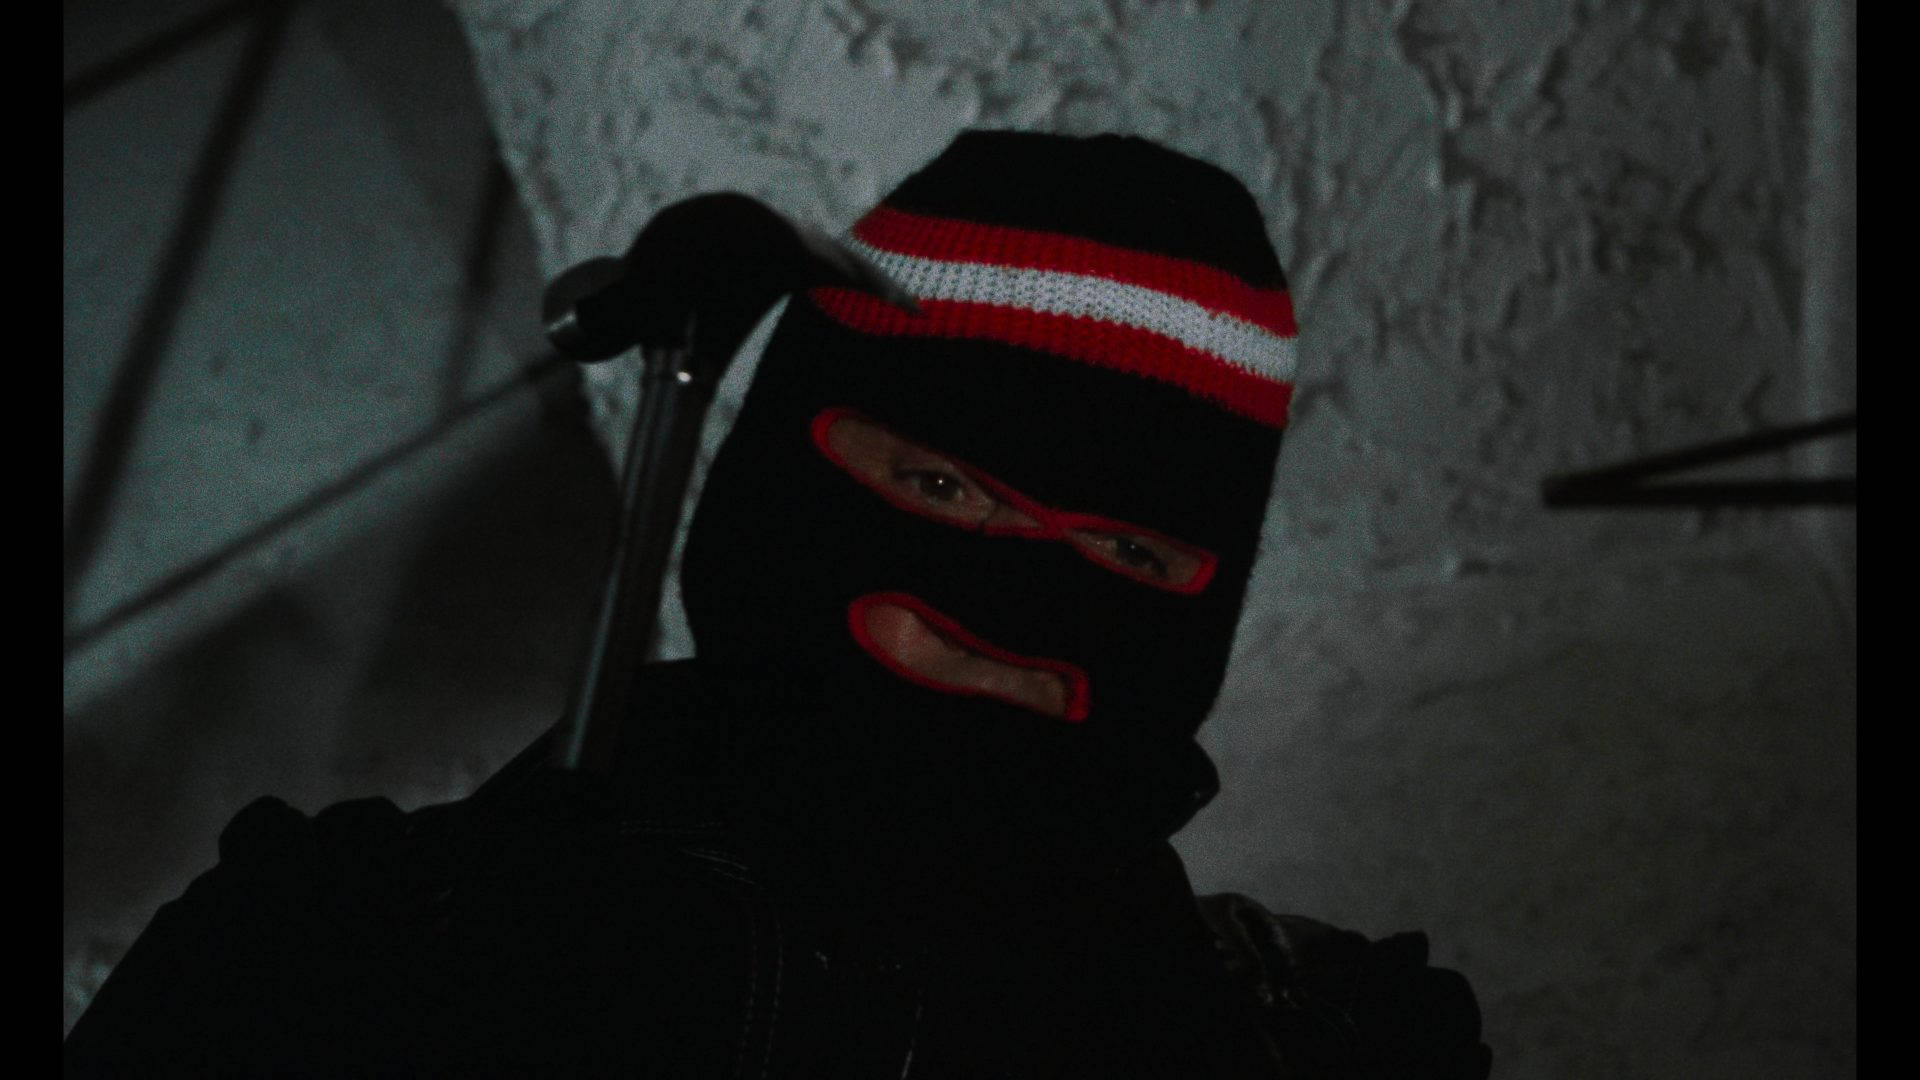 "Be Protected and Ready for Cold Weather with a Black Ski Mask!" Wallpaper